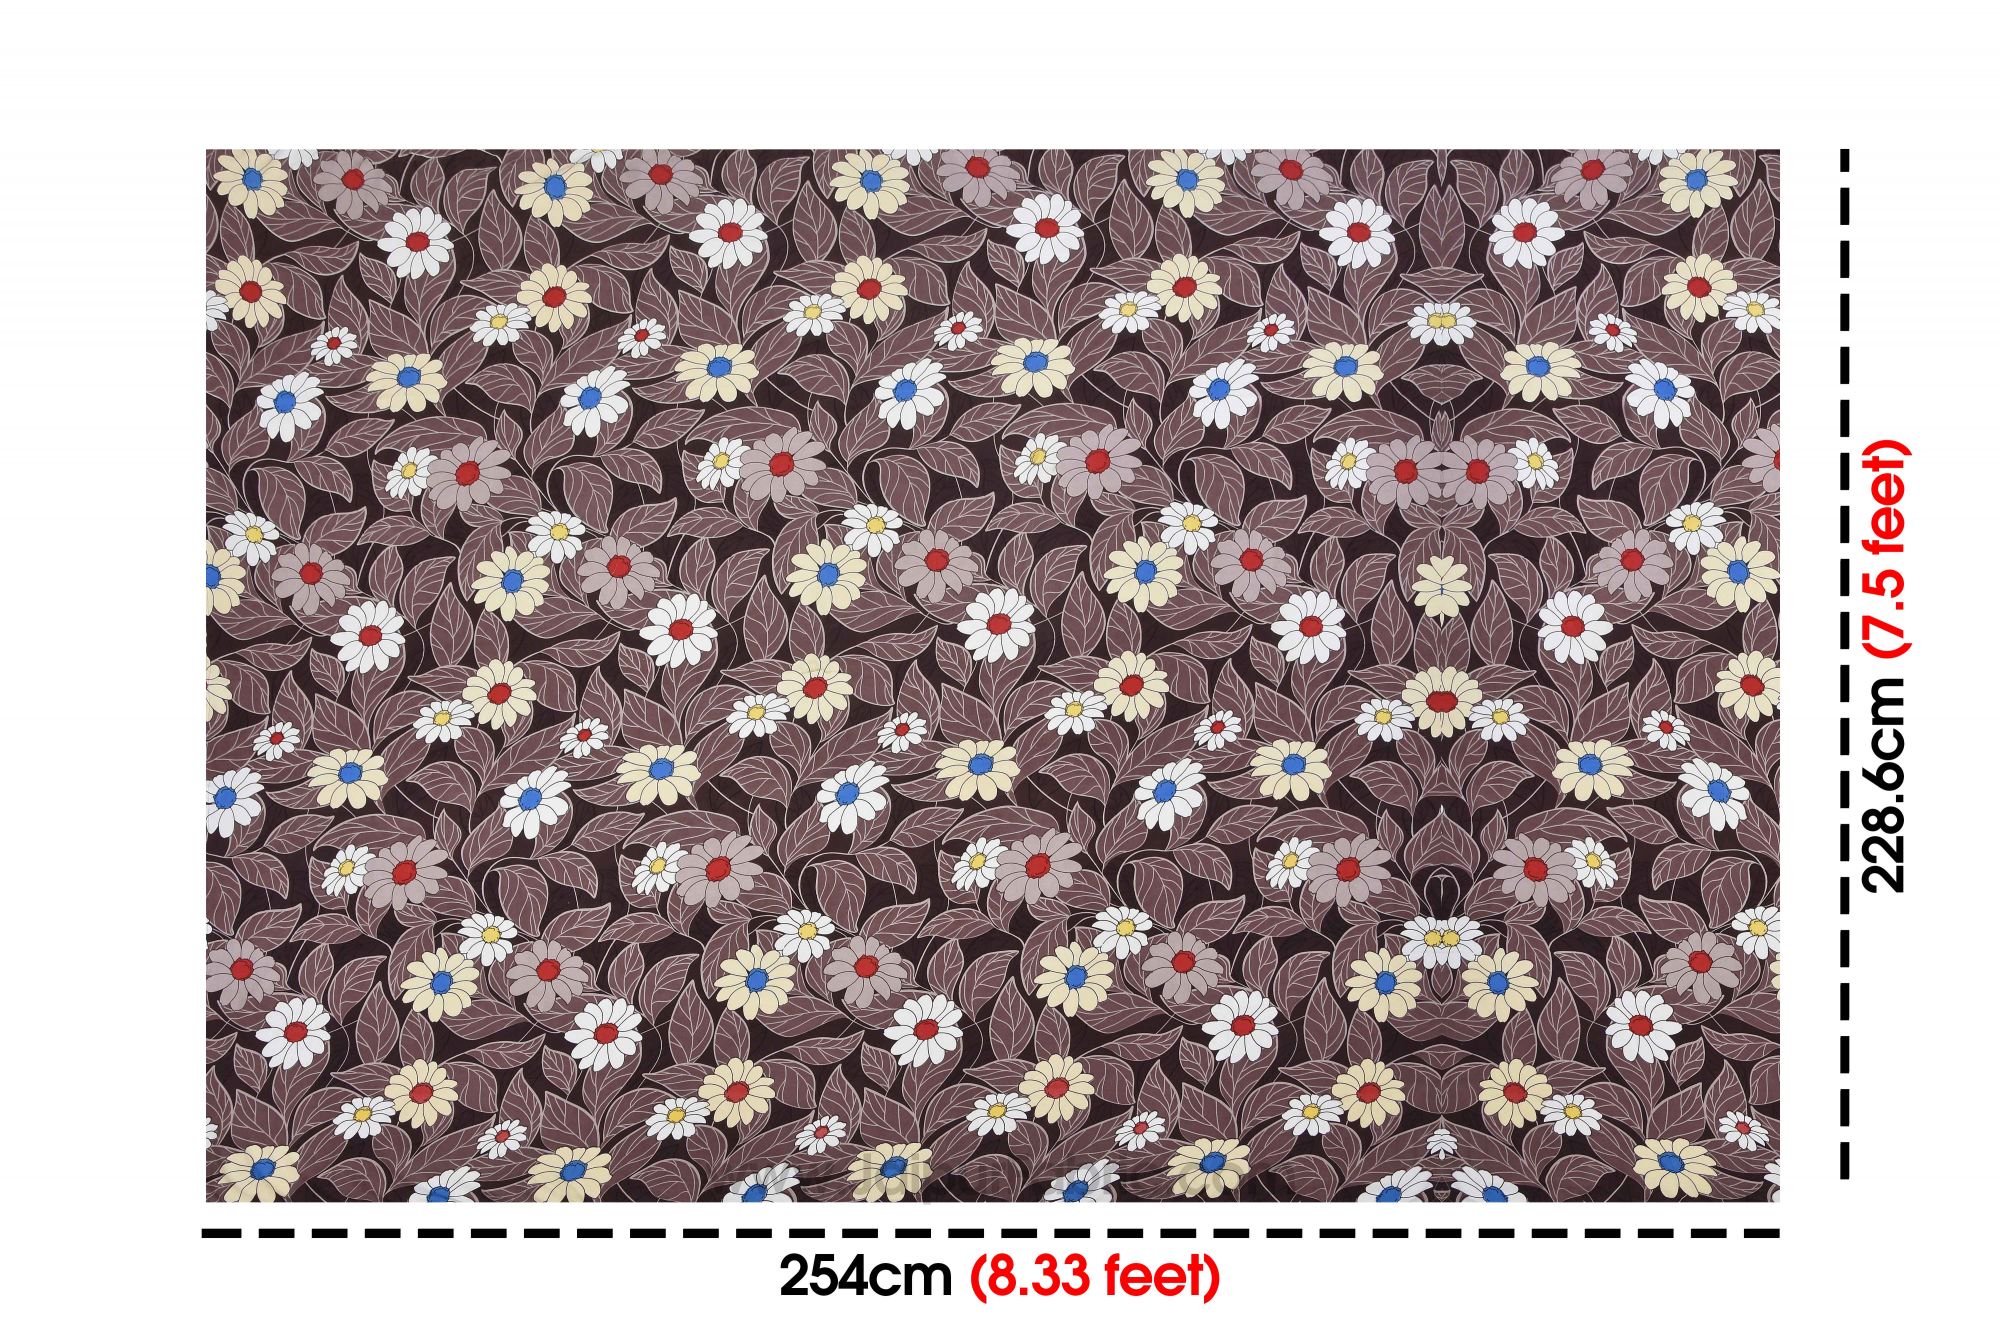 Chocolate Brown Multi Floral Super Soft Double Bedsheet